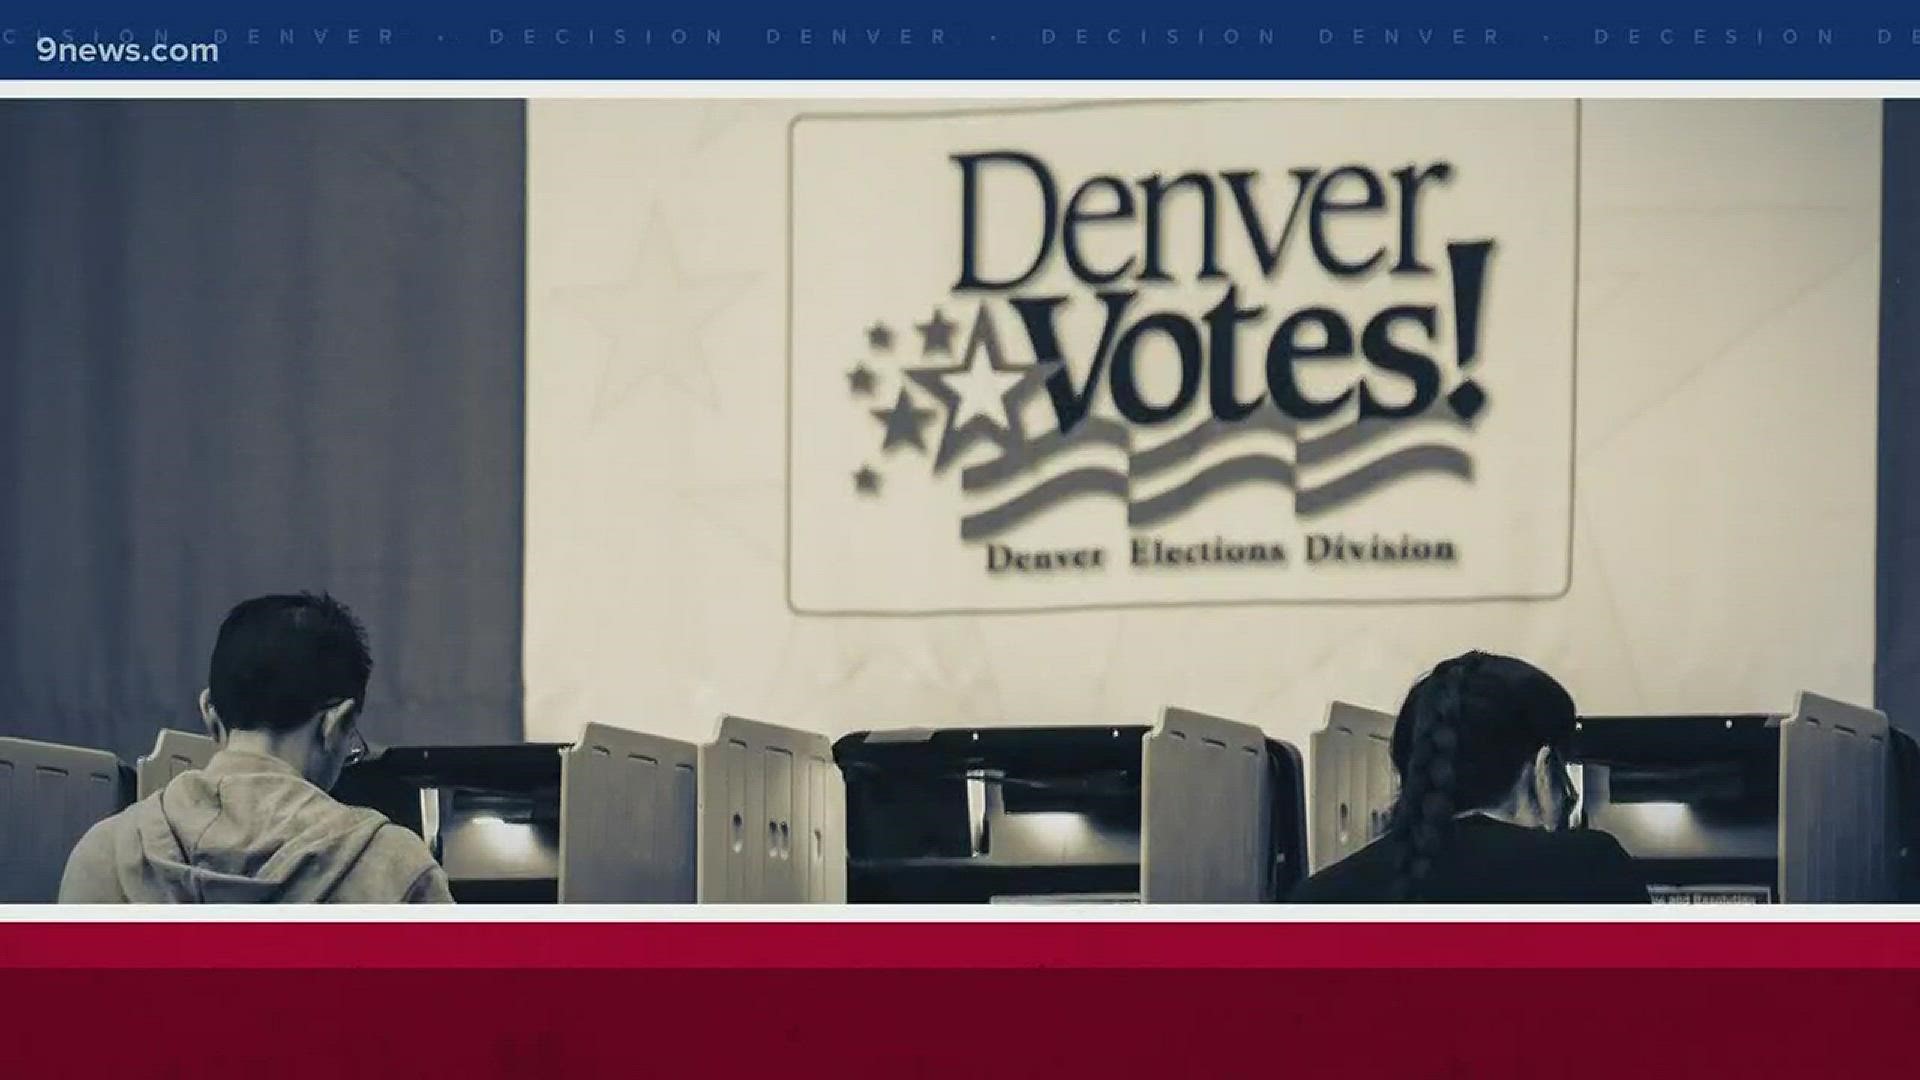 The Denver election season will continue into next month. Denver Mayor Michael Hancock becomes first Denver mayor forced into runoff since 1995. Mayor Hanock is live at 9NEWS on Wednesday, May 8, 2019.